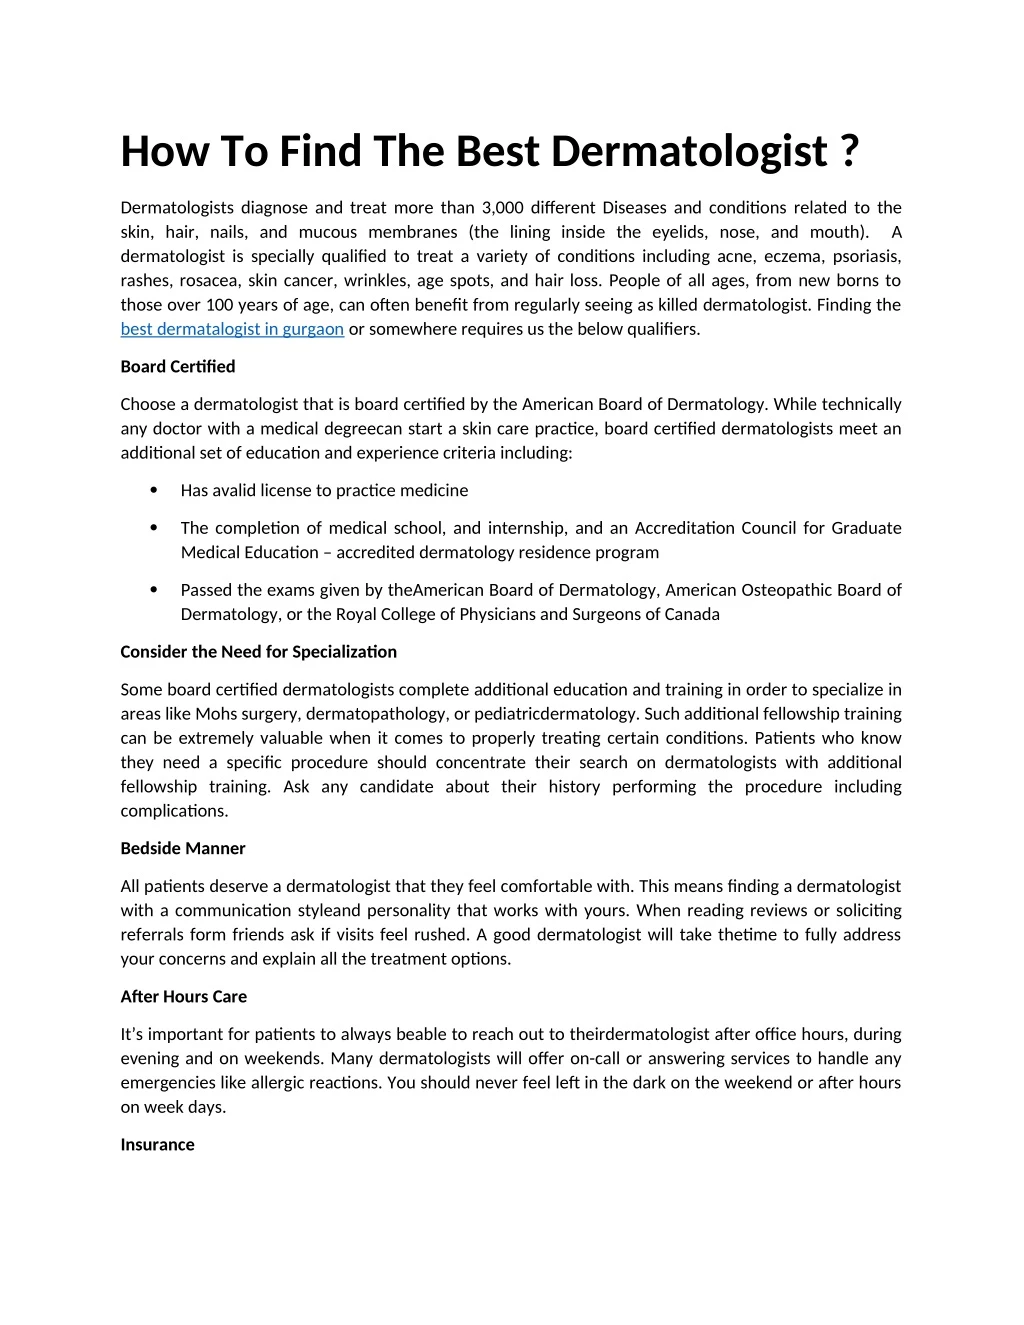 how to find the best dermatologist